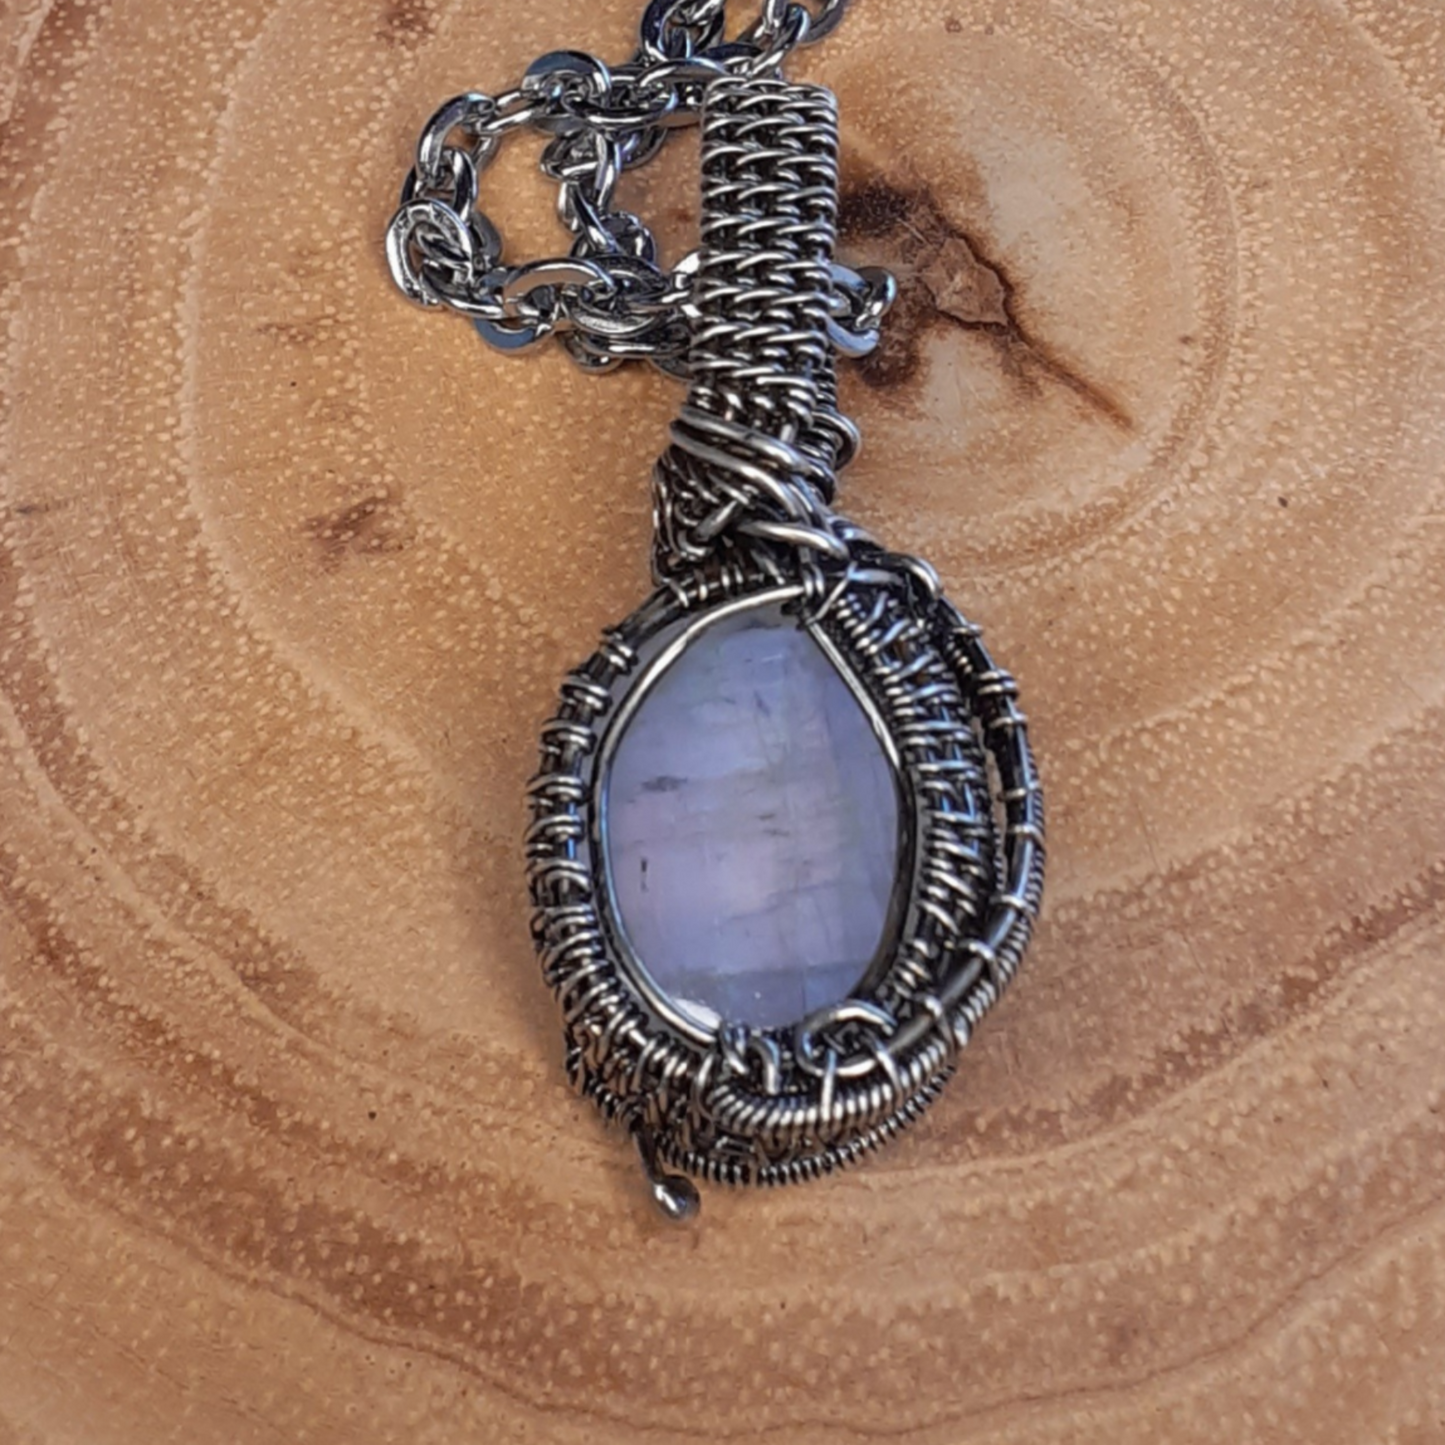 Moonstone Pendant Necklace Hand Woven Silver Wire |WRD - WarmRainyDay